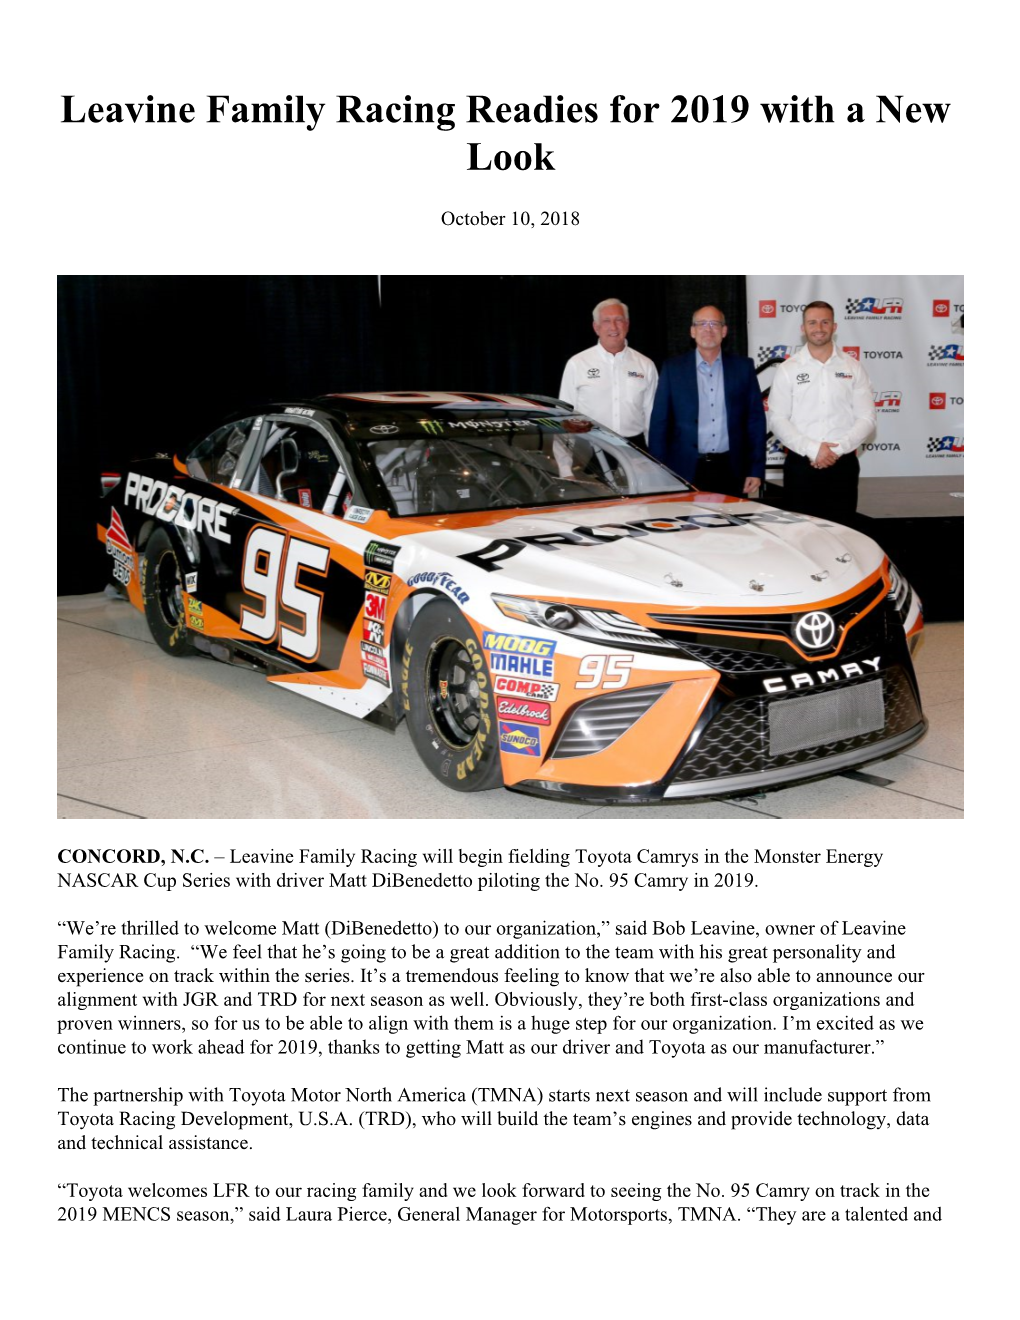 Leavine Family Racing Readies for 2019 with a New Look